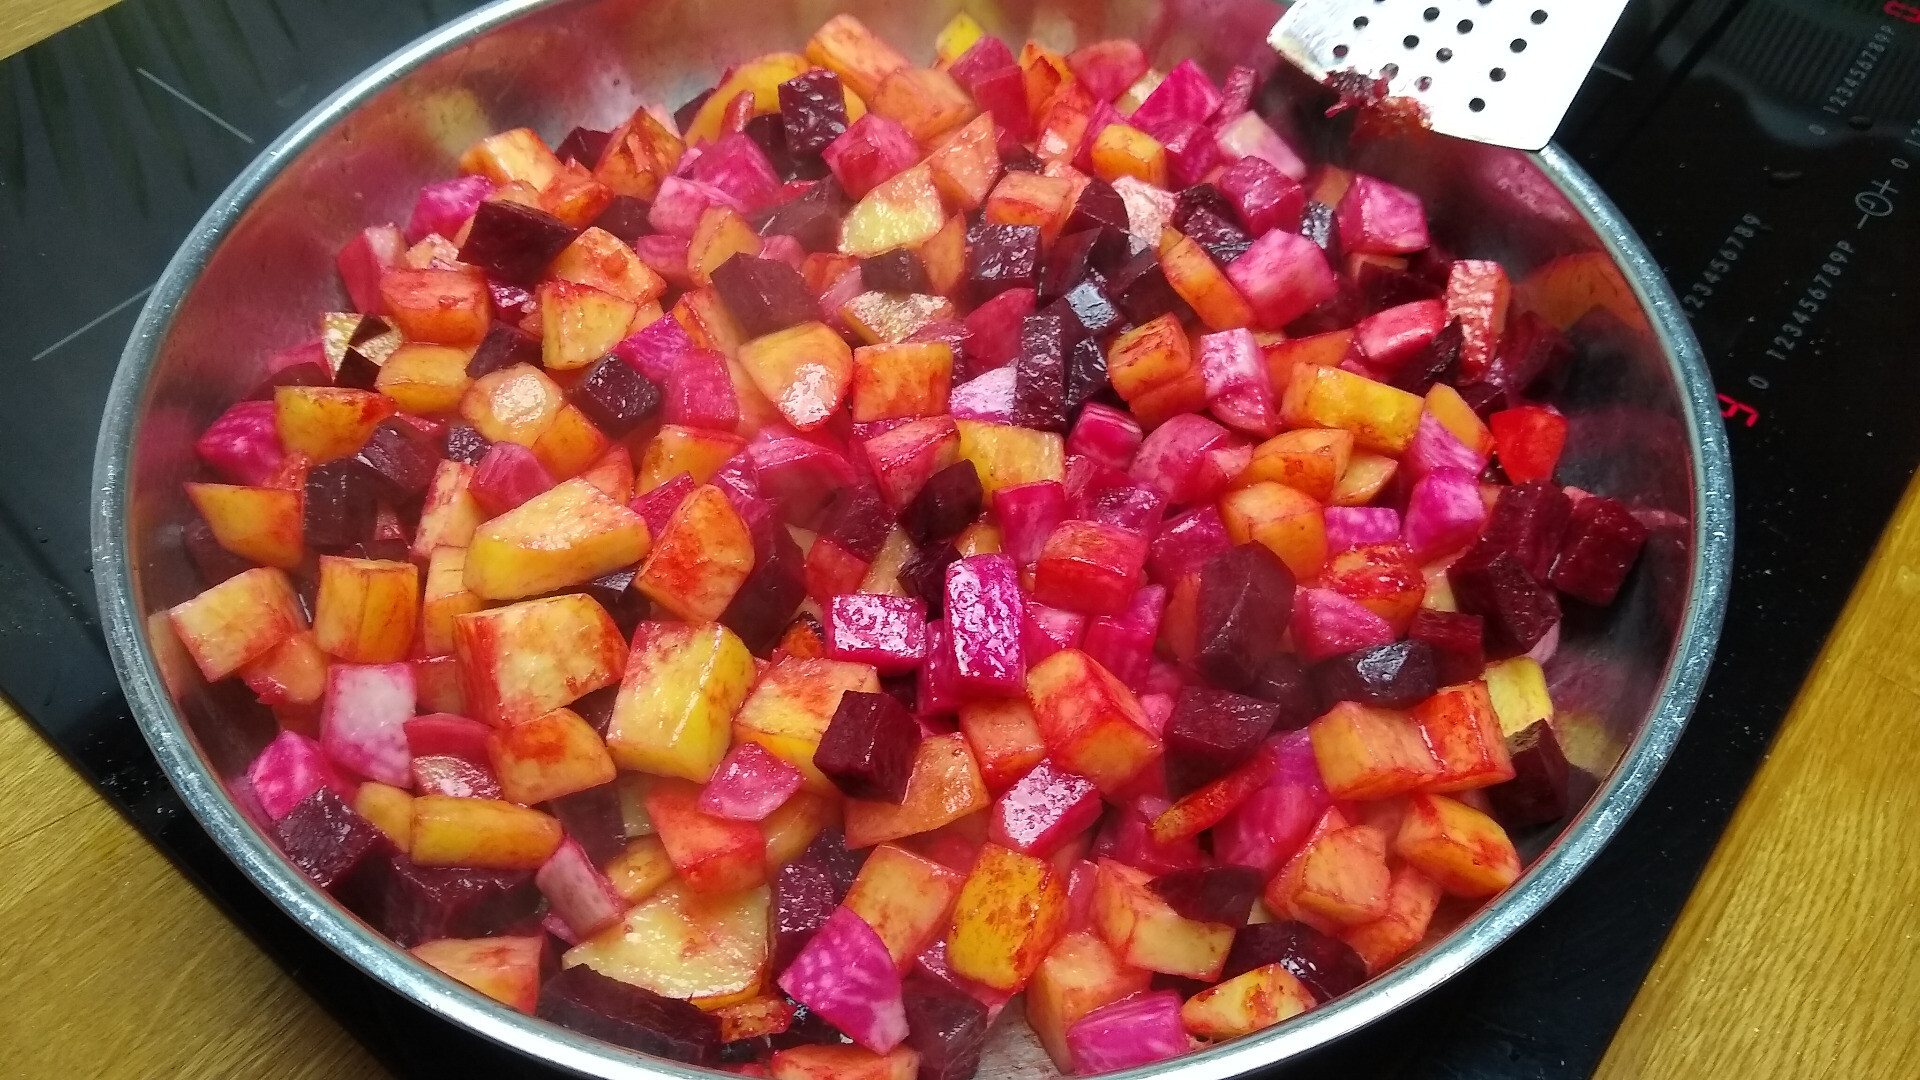 beetroot and potatoes diced in frying pan